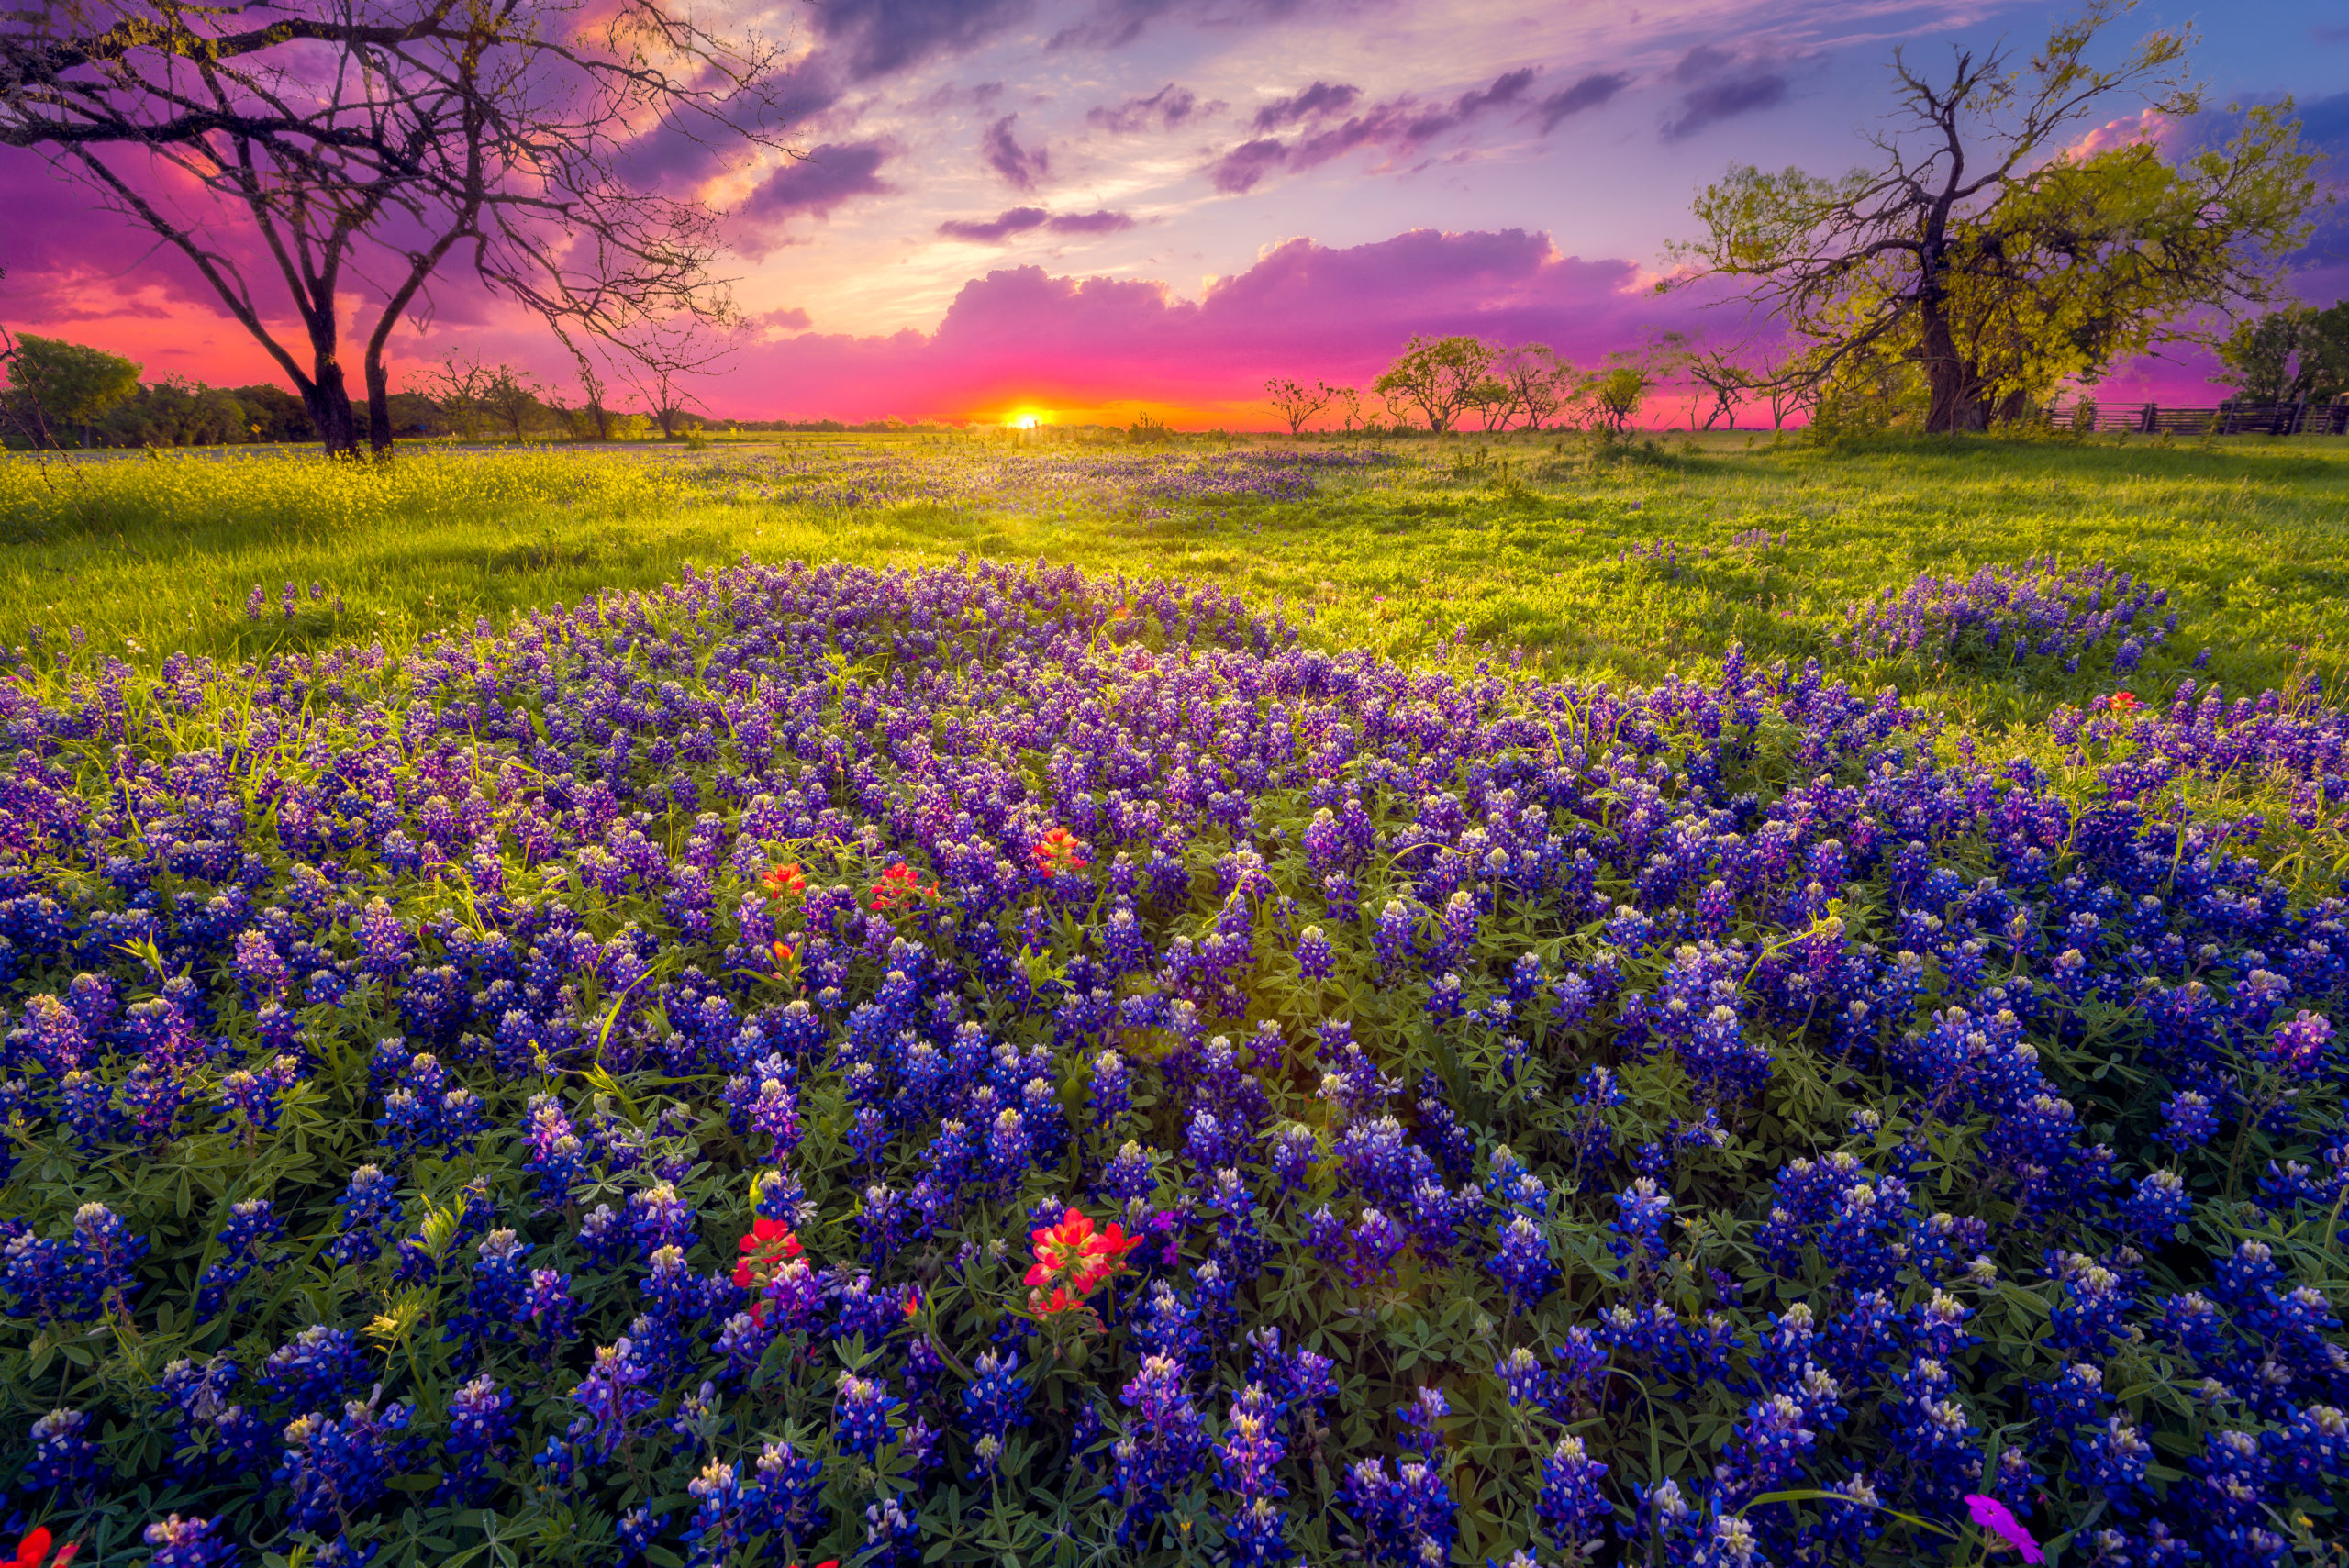 A field full of purple and red flowers with sunset in the behind